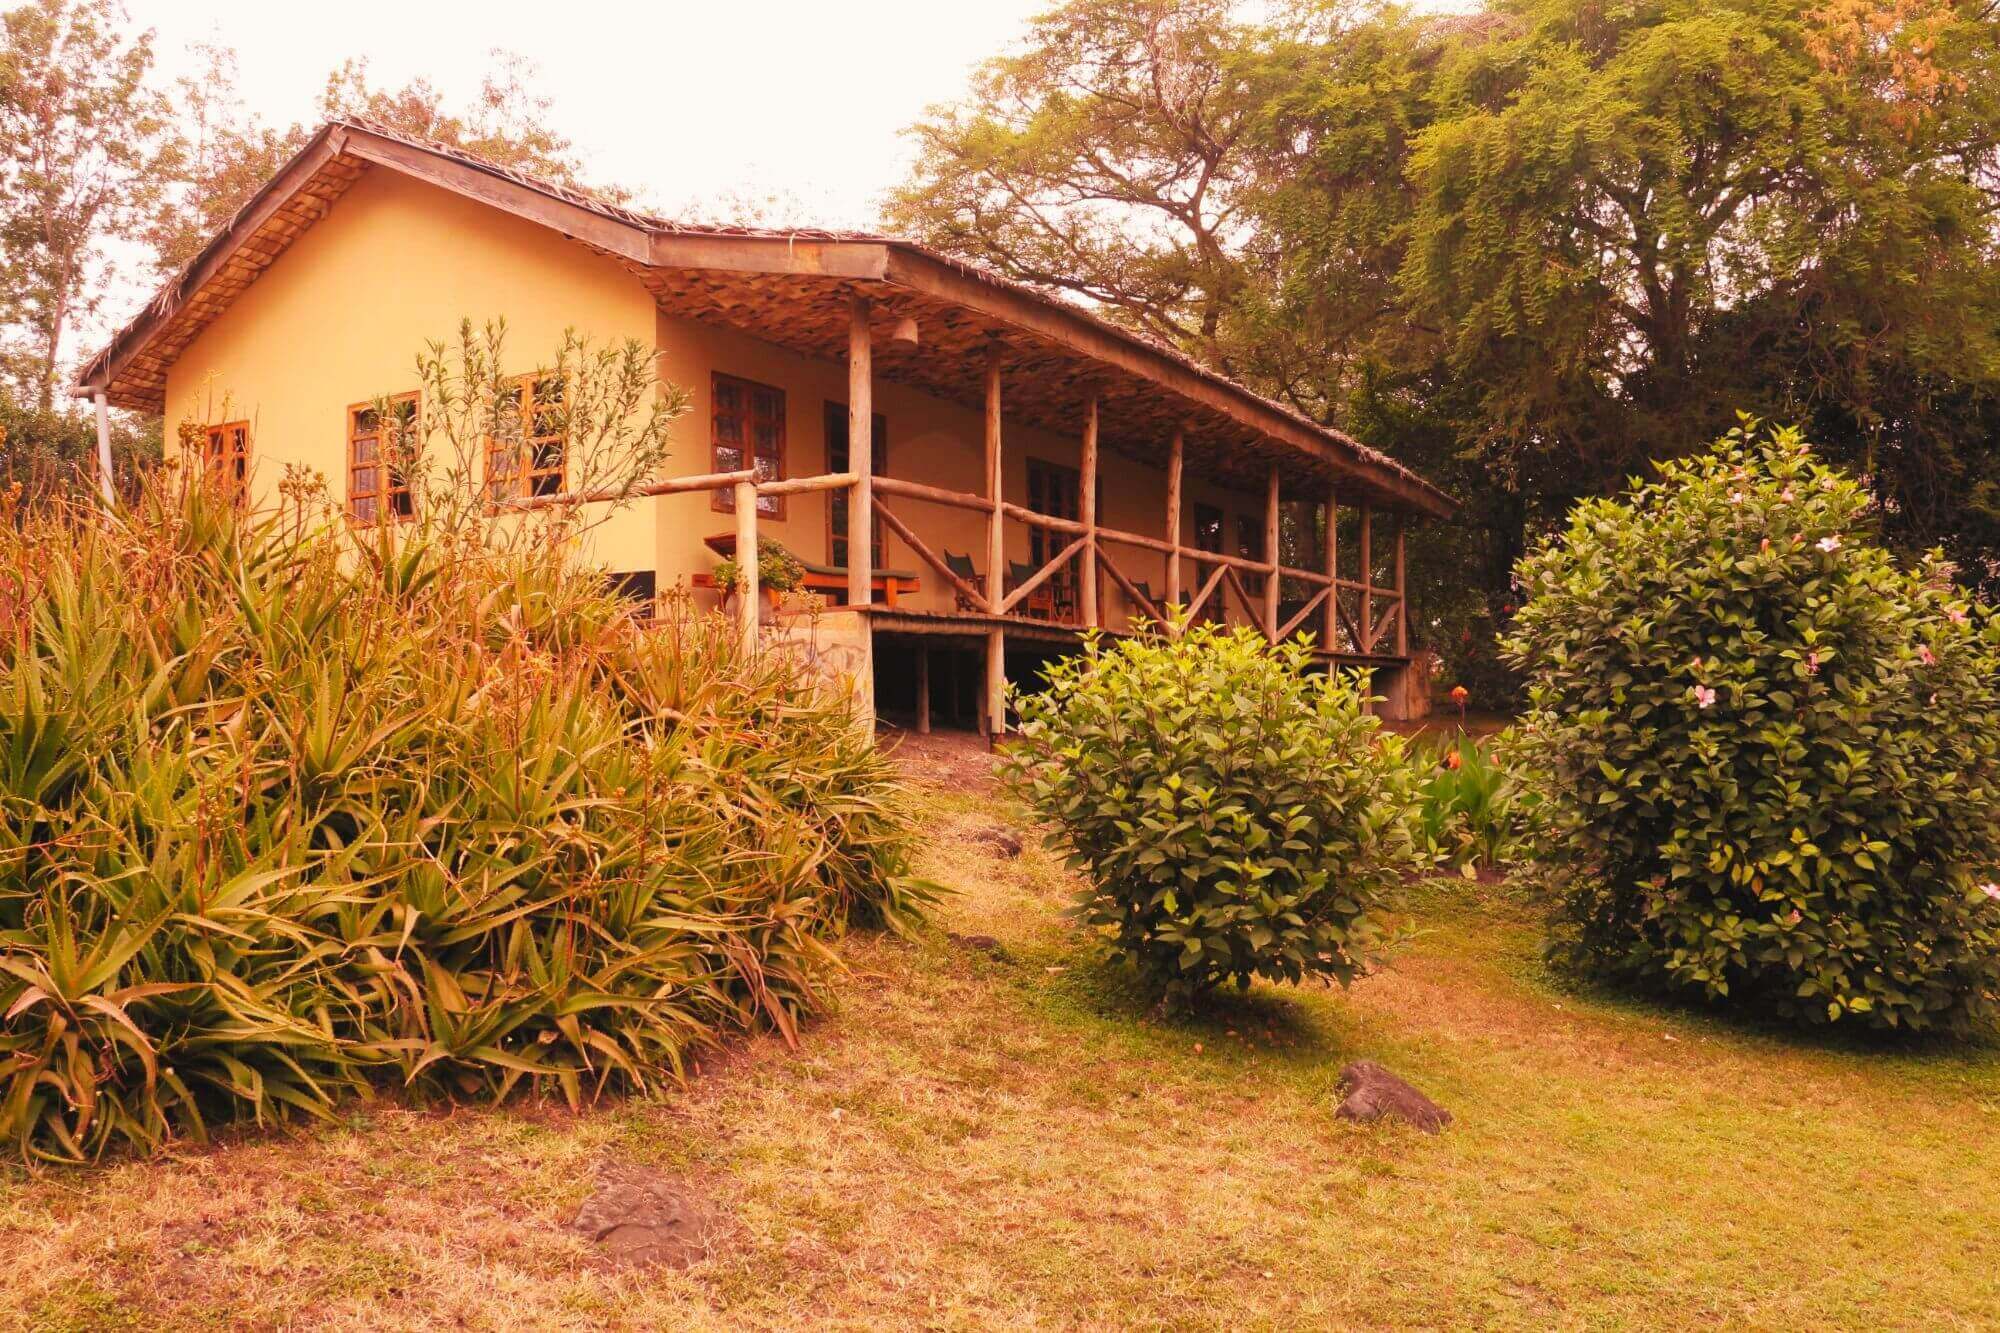 The African House (4) - 